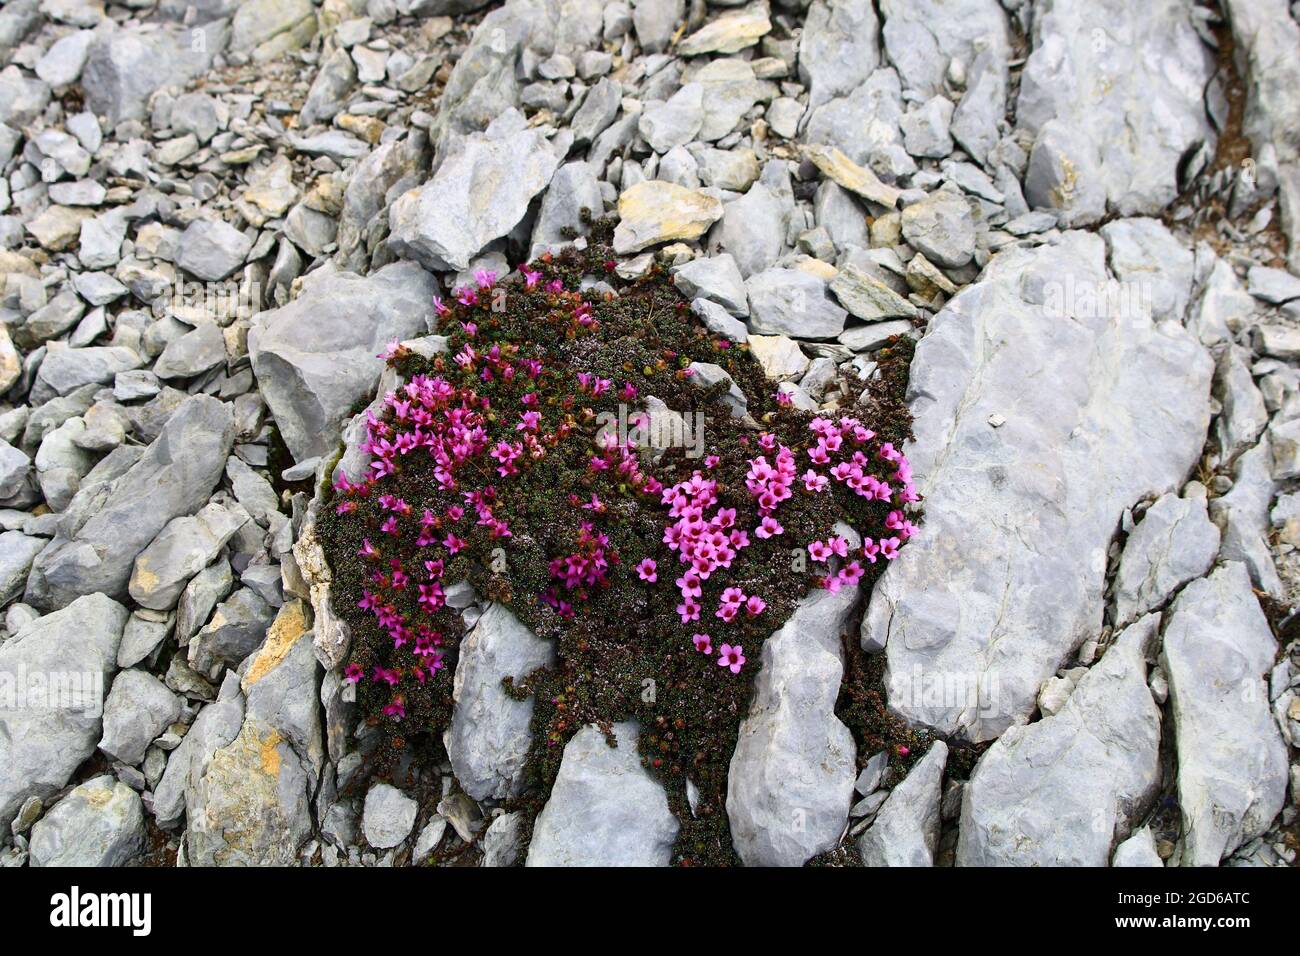 Closeup of purple saxifrage flowers growing on the rocks Stock Photo